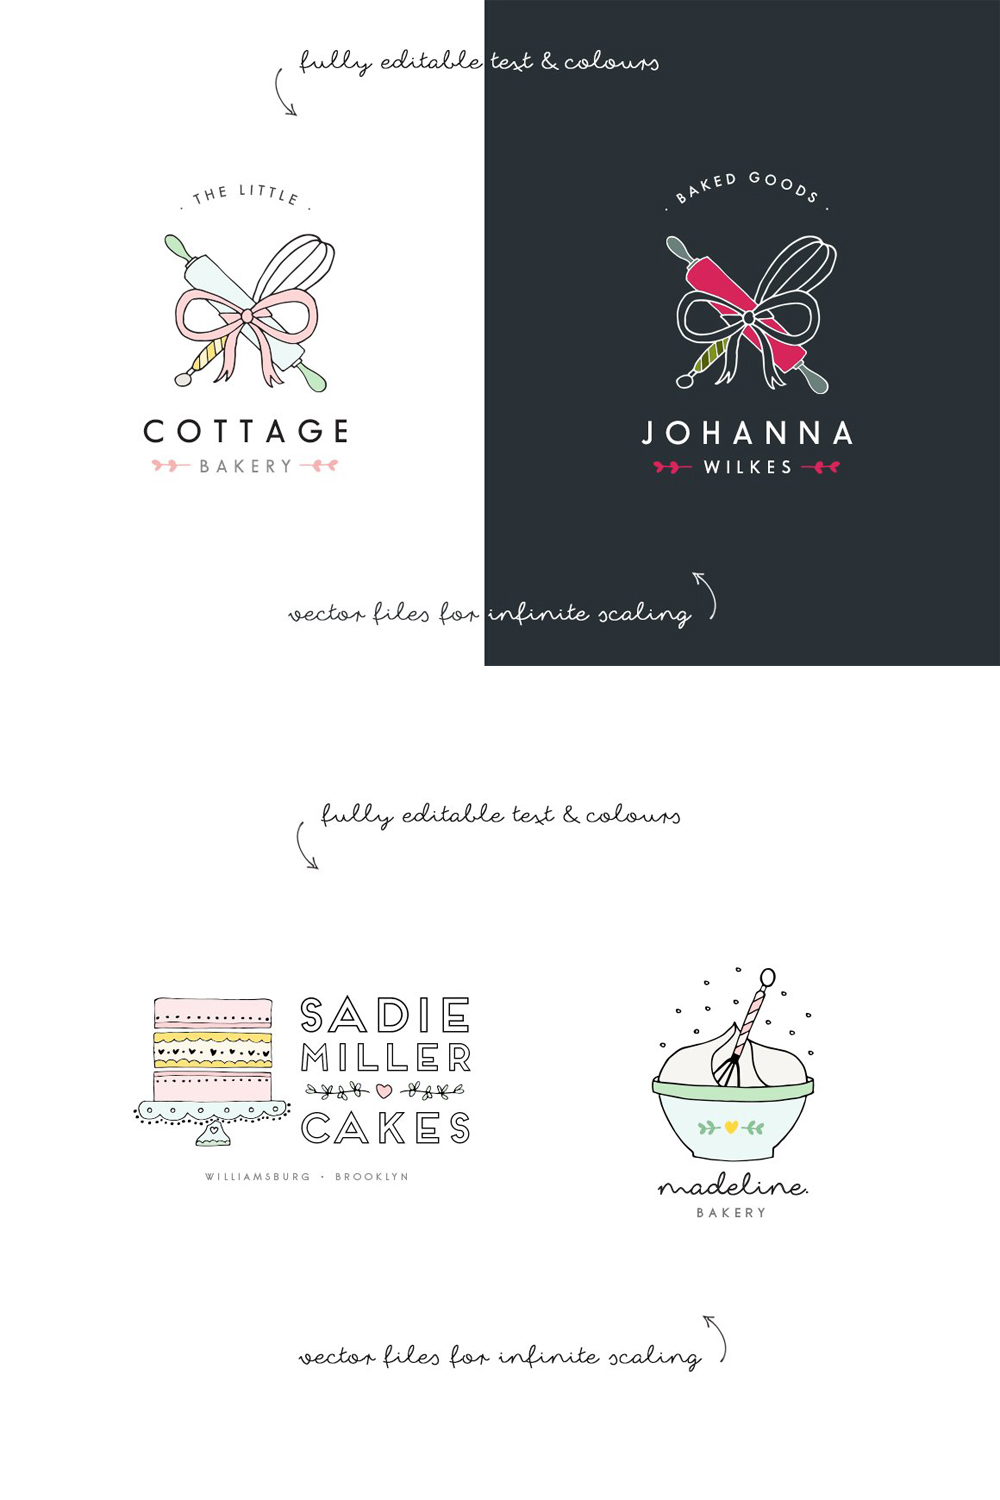 Two different bakery logos on white "Cottage Bakery" and black "Johanna Wilkes" backgrounds.